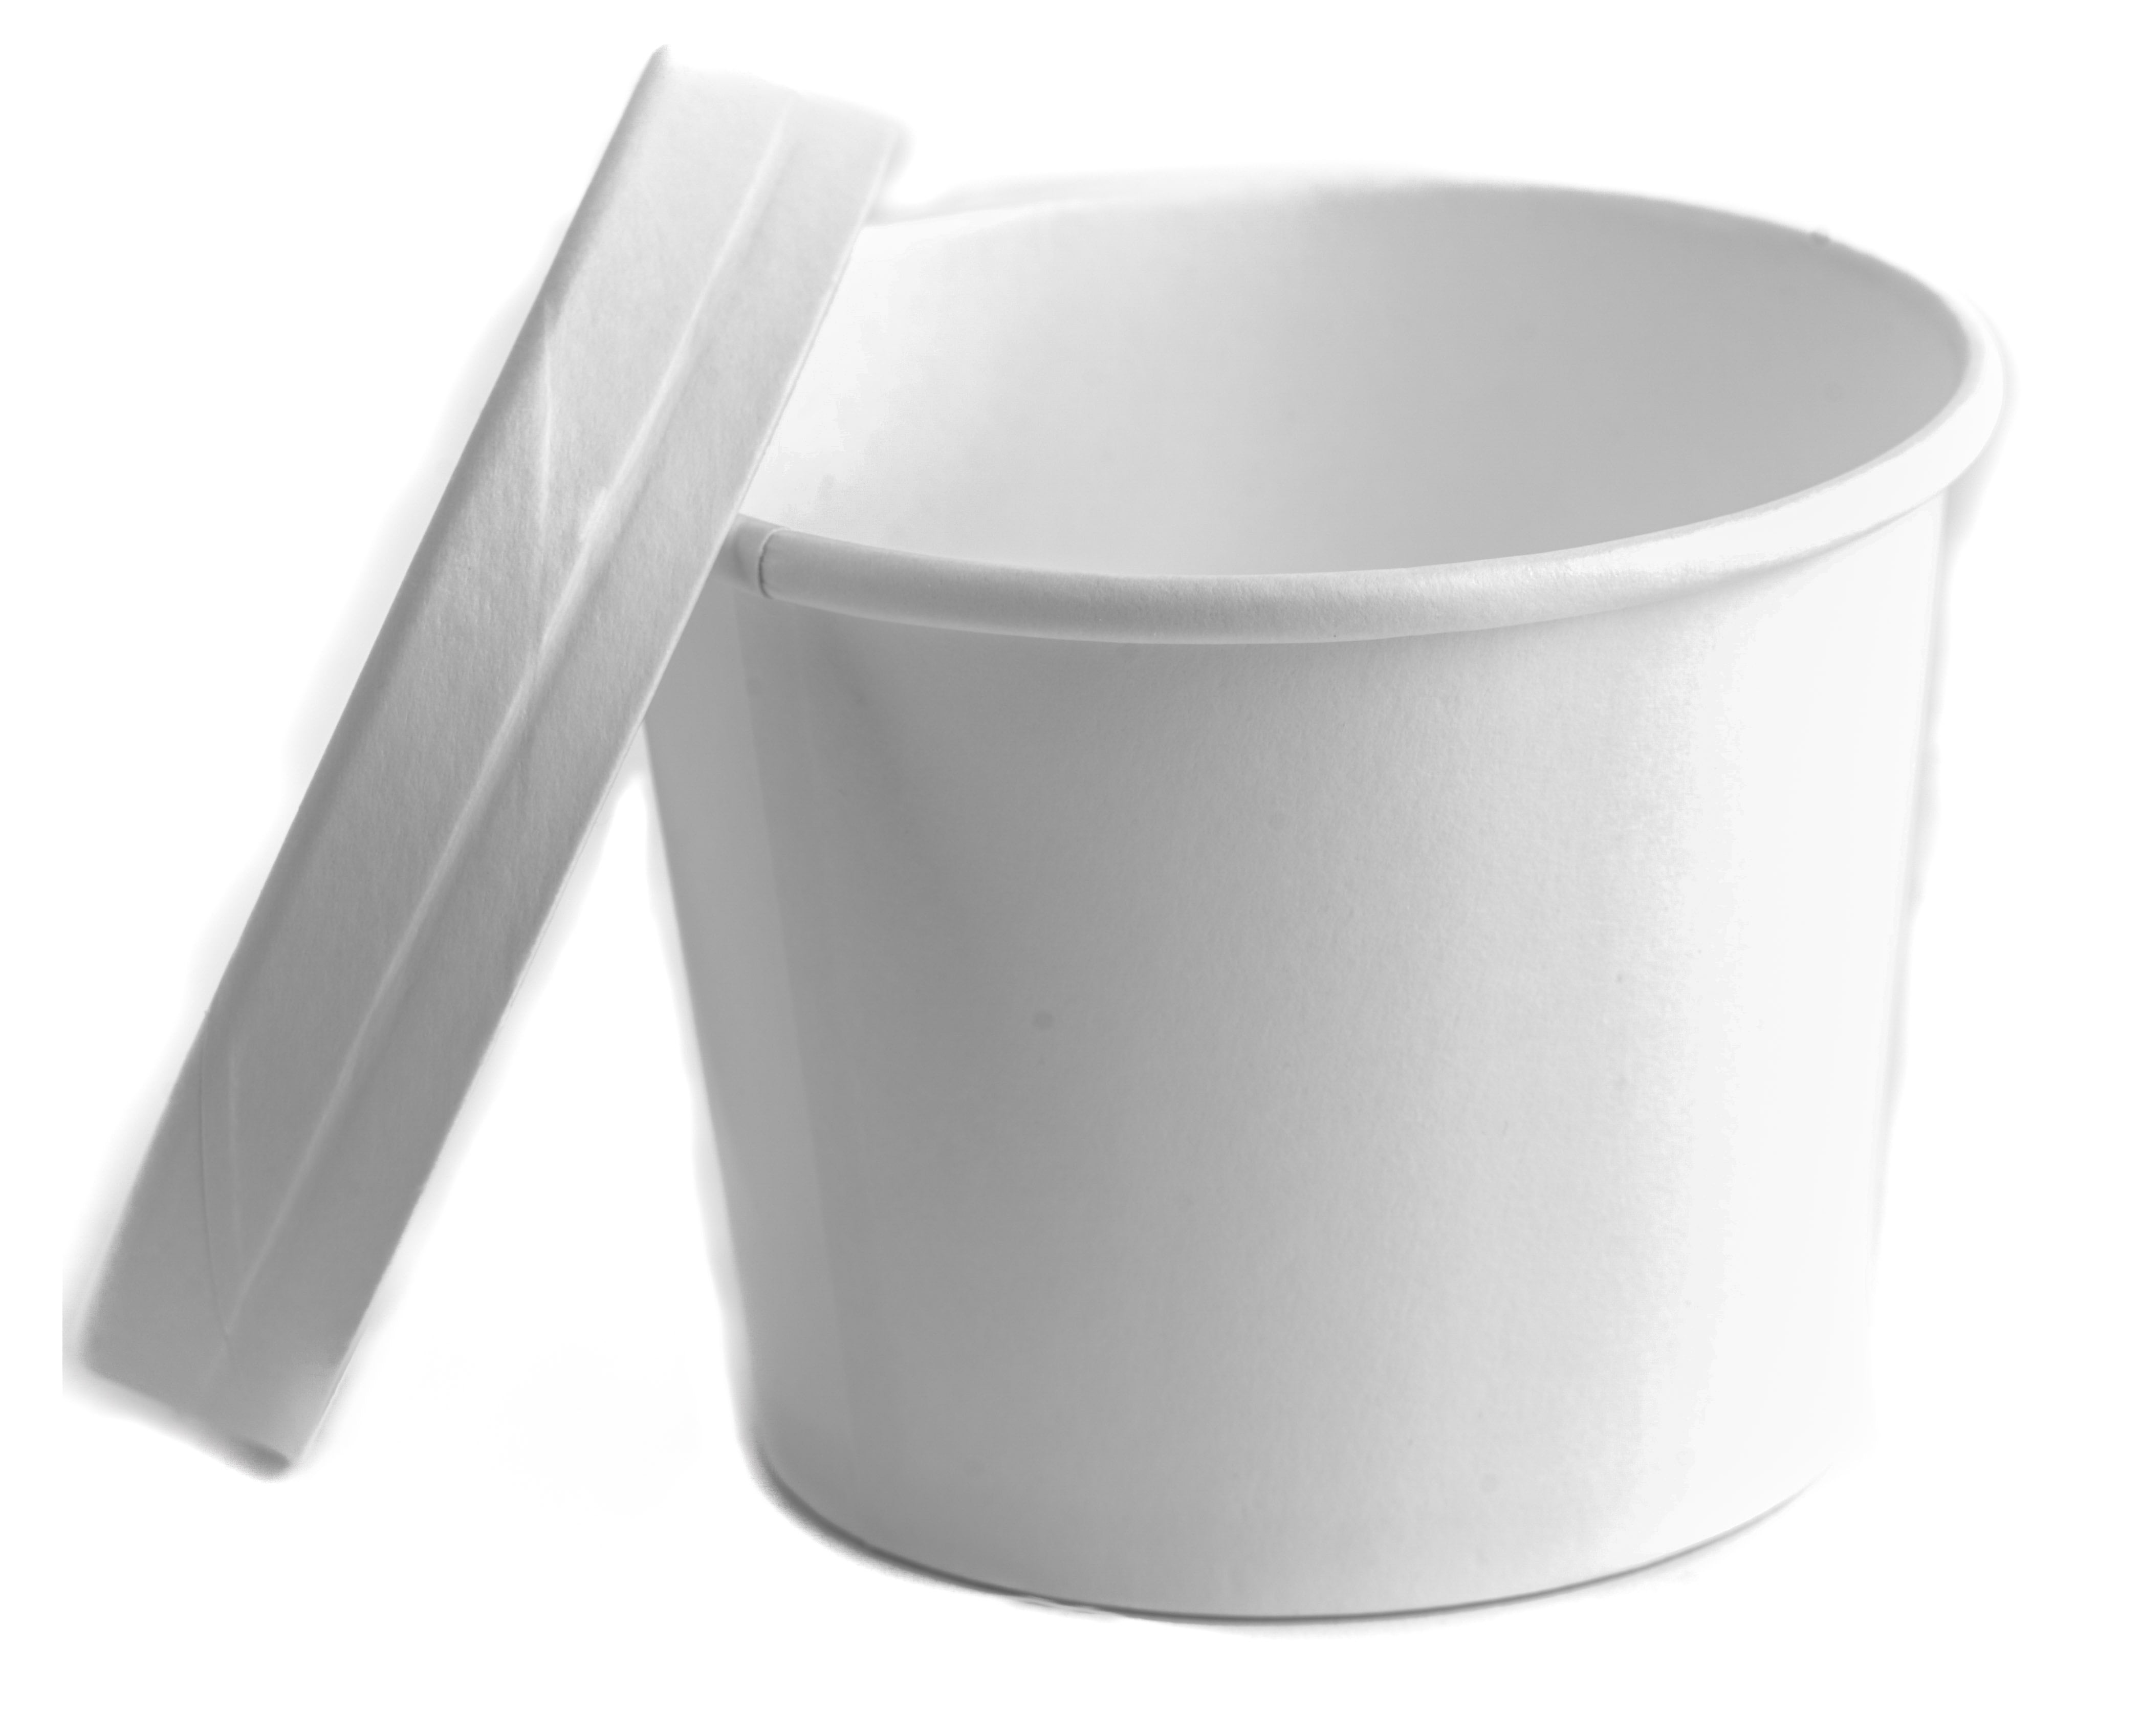 150 Clear Plastic Portion Cups with Attached Lids Disposable Leak Proof 1 Oz. 